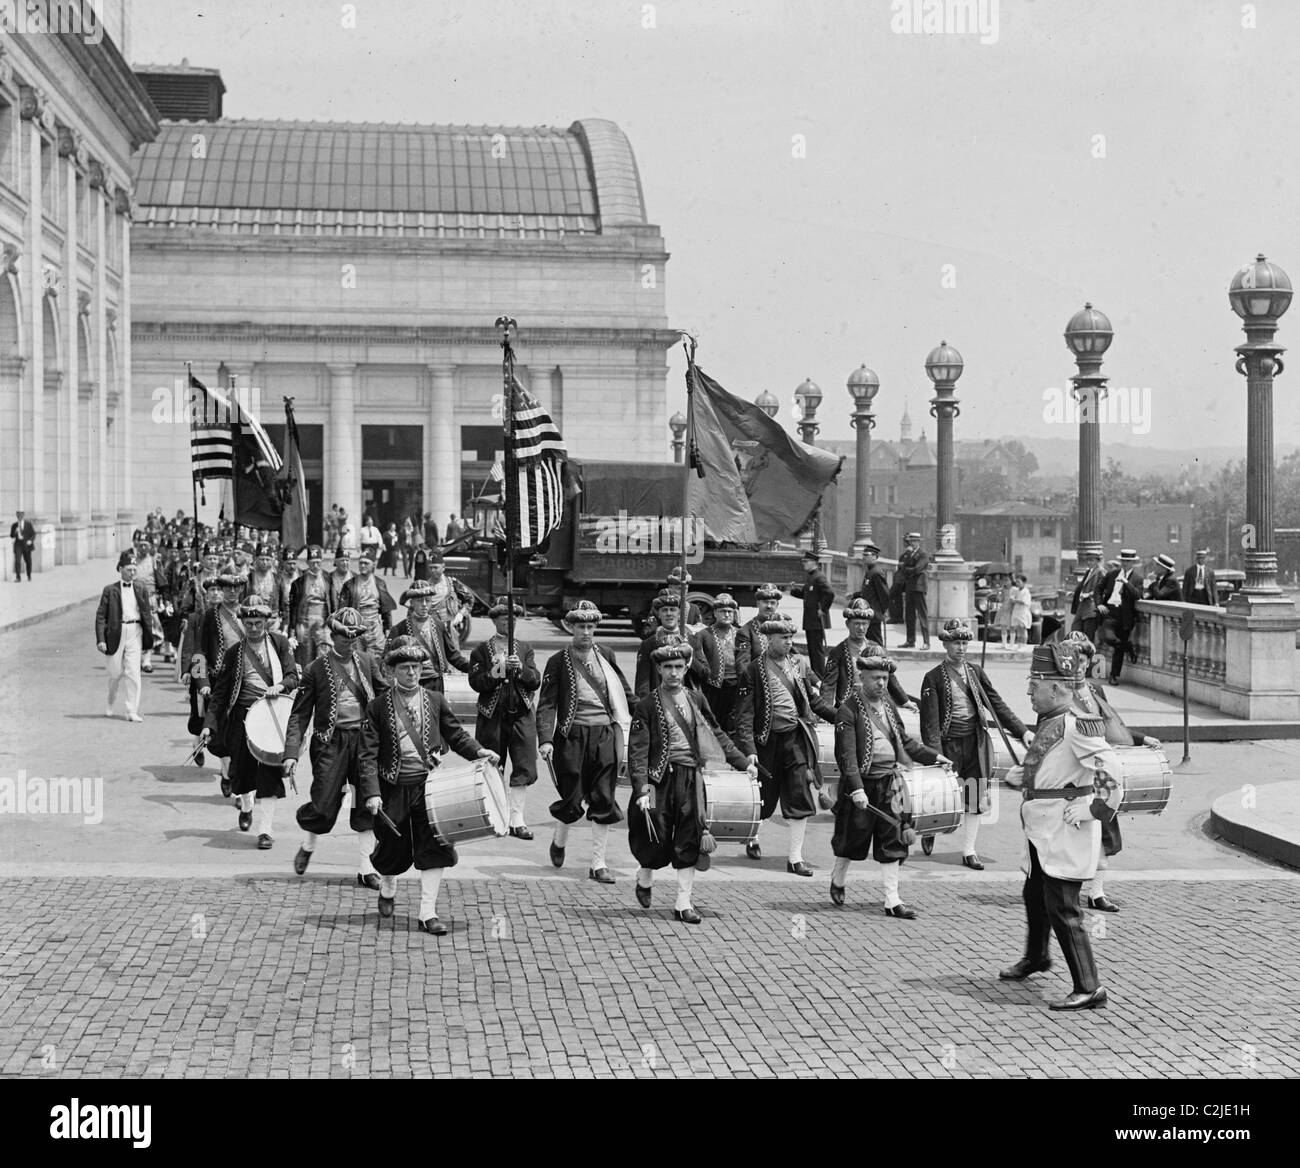 Anah Shriners Group from Bangor Maine as a Band arriving and Playing as Washington's Union Station Stock Photo